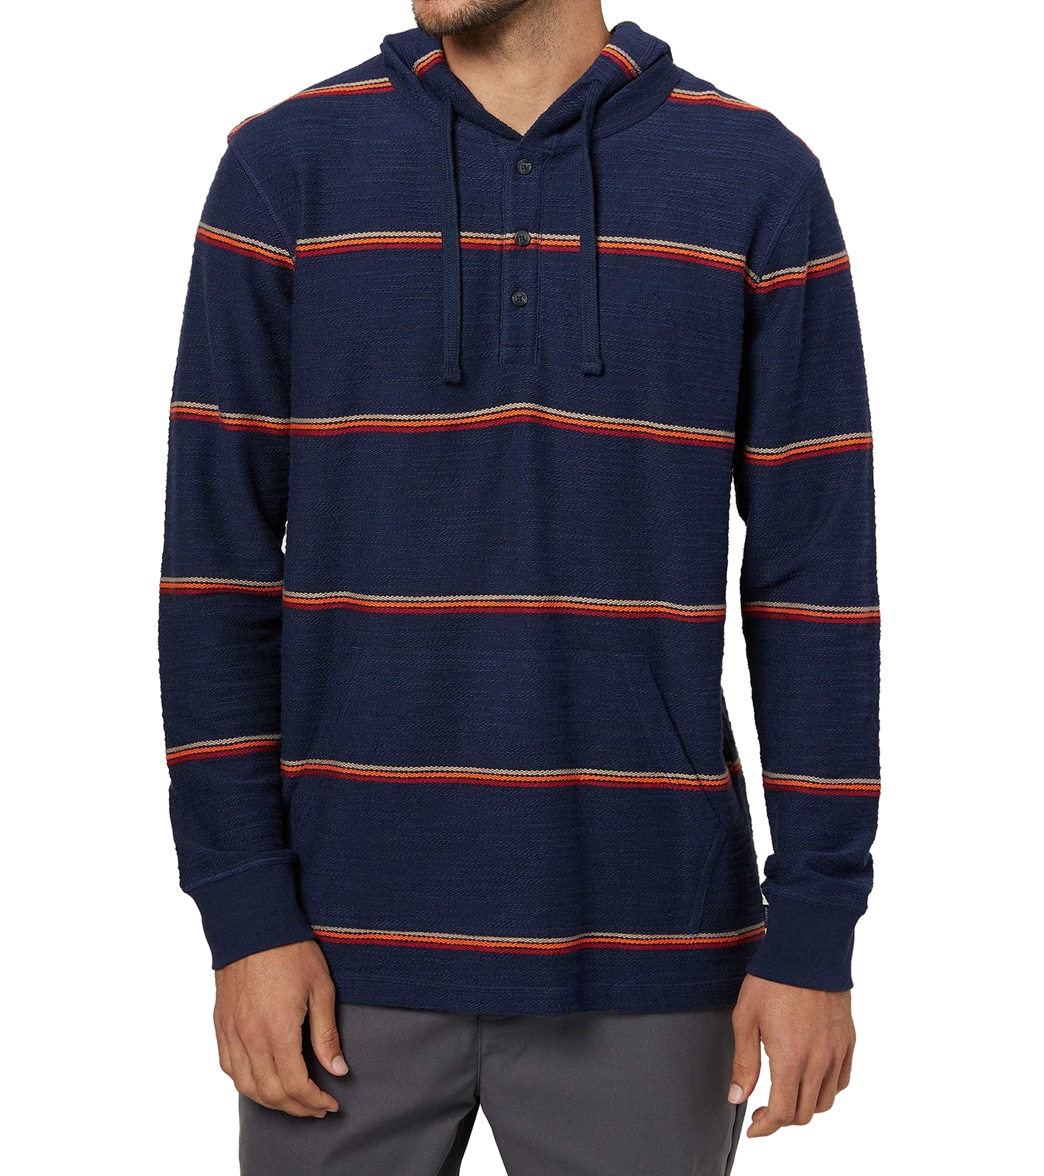 O'neill Men's Baja Pullover Hoodie - Navy 2 Large Cotton - Swimoutlet.com